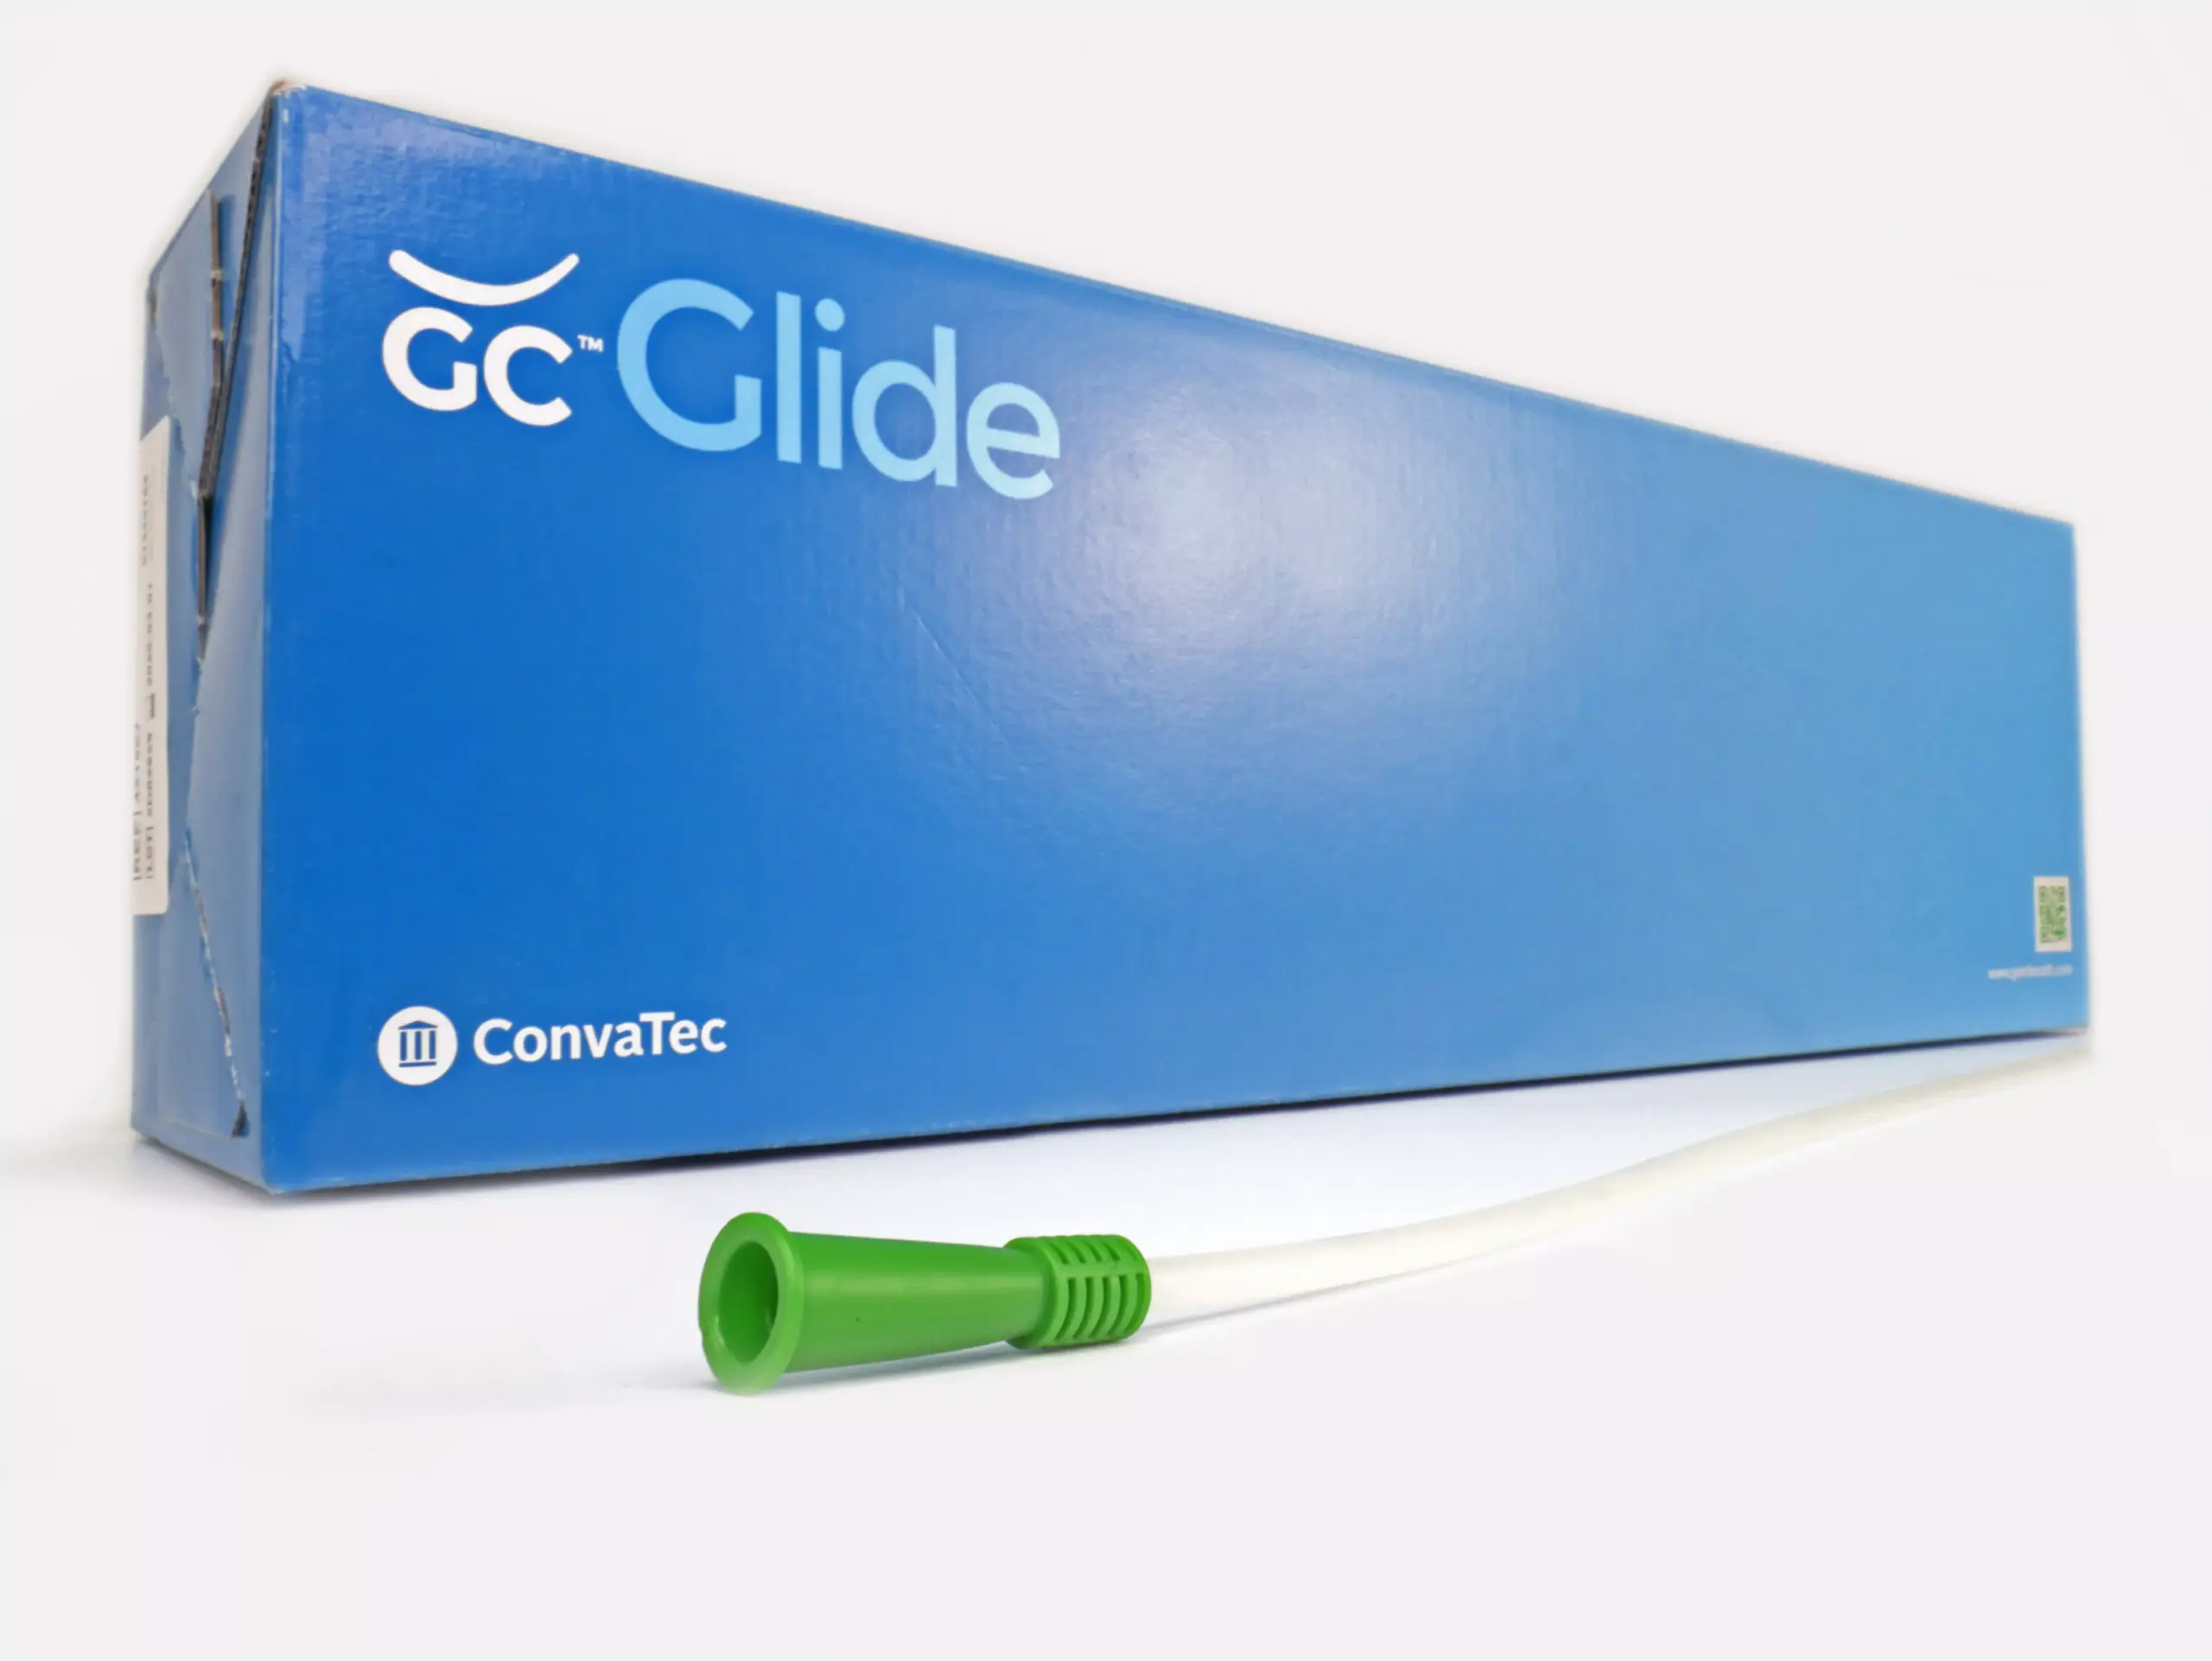 A visual against a white backdrop showcasing a box containing 30 GentleCath Glide catheters from RA Fischer. In front of the box is one of the catheters with a green gripper. The box clearly features "GC Glide," "Convatec," "www.gentlecath.com," and a QR code